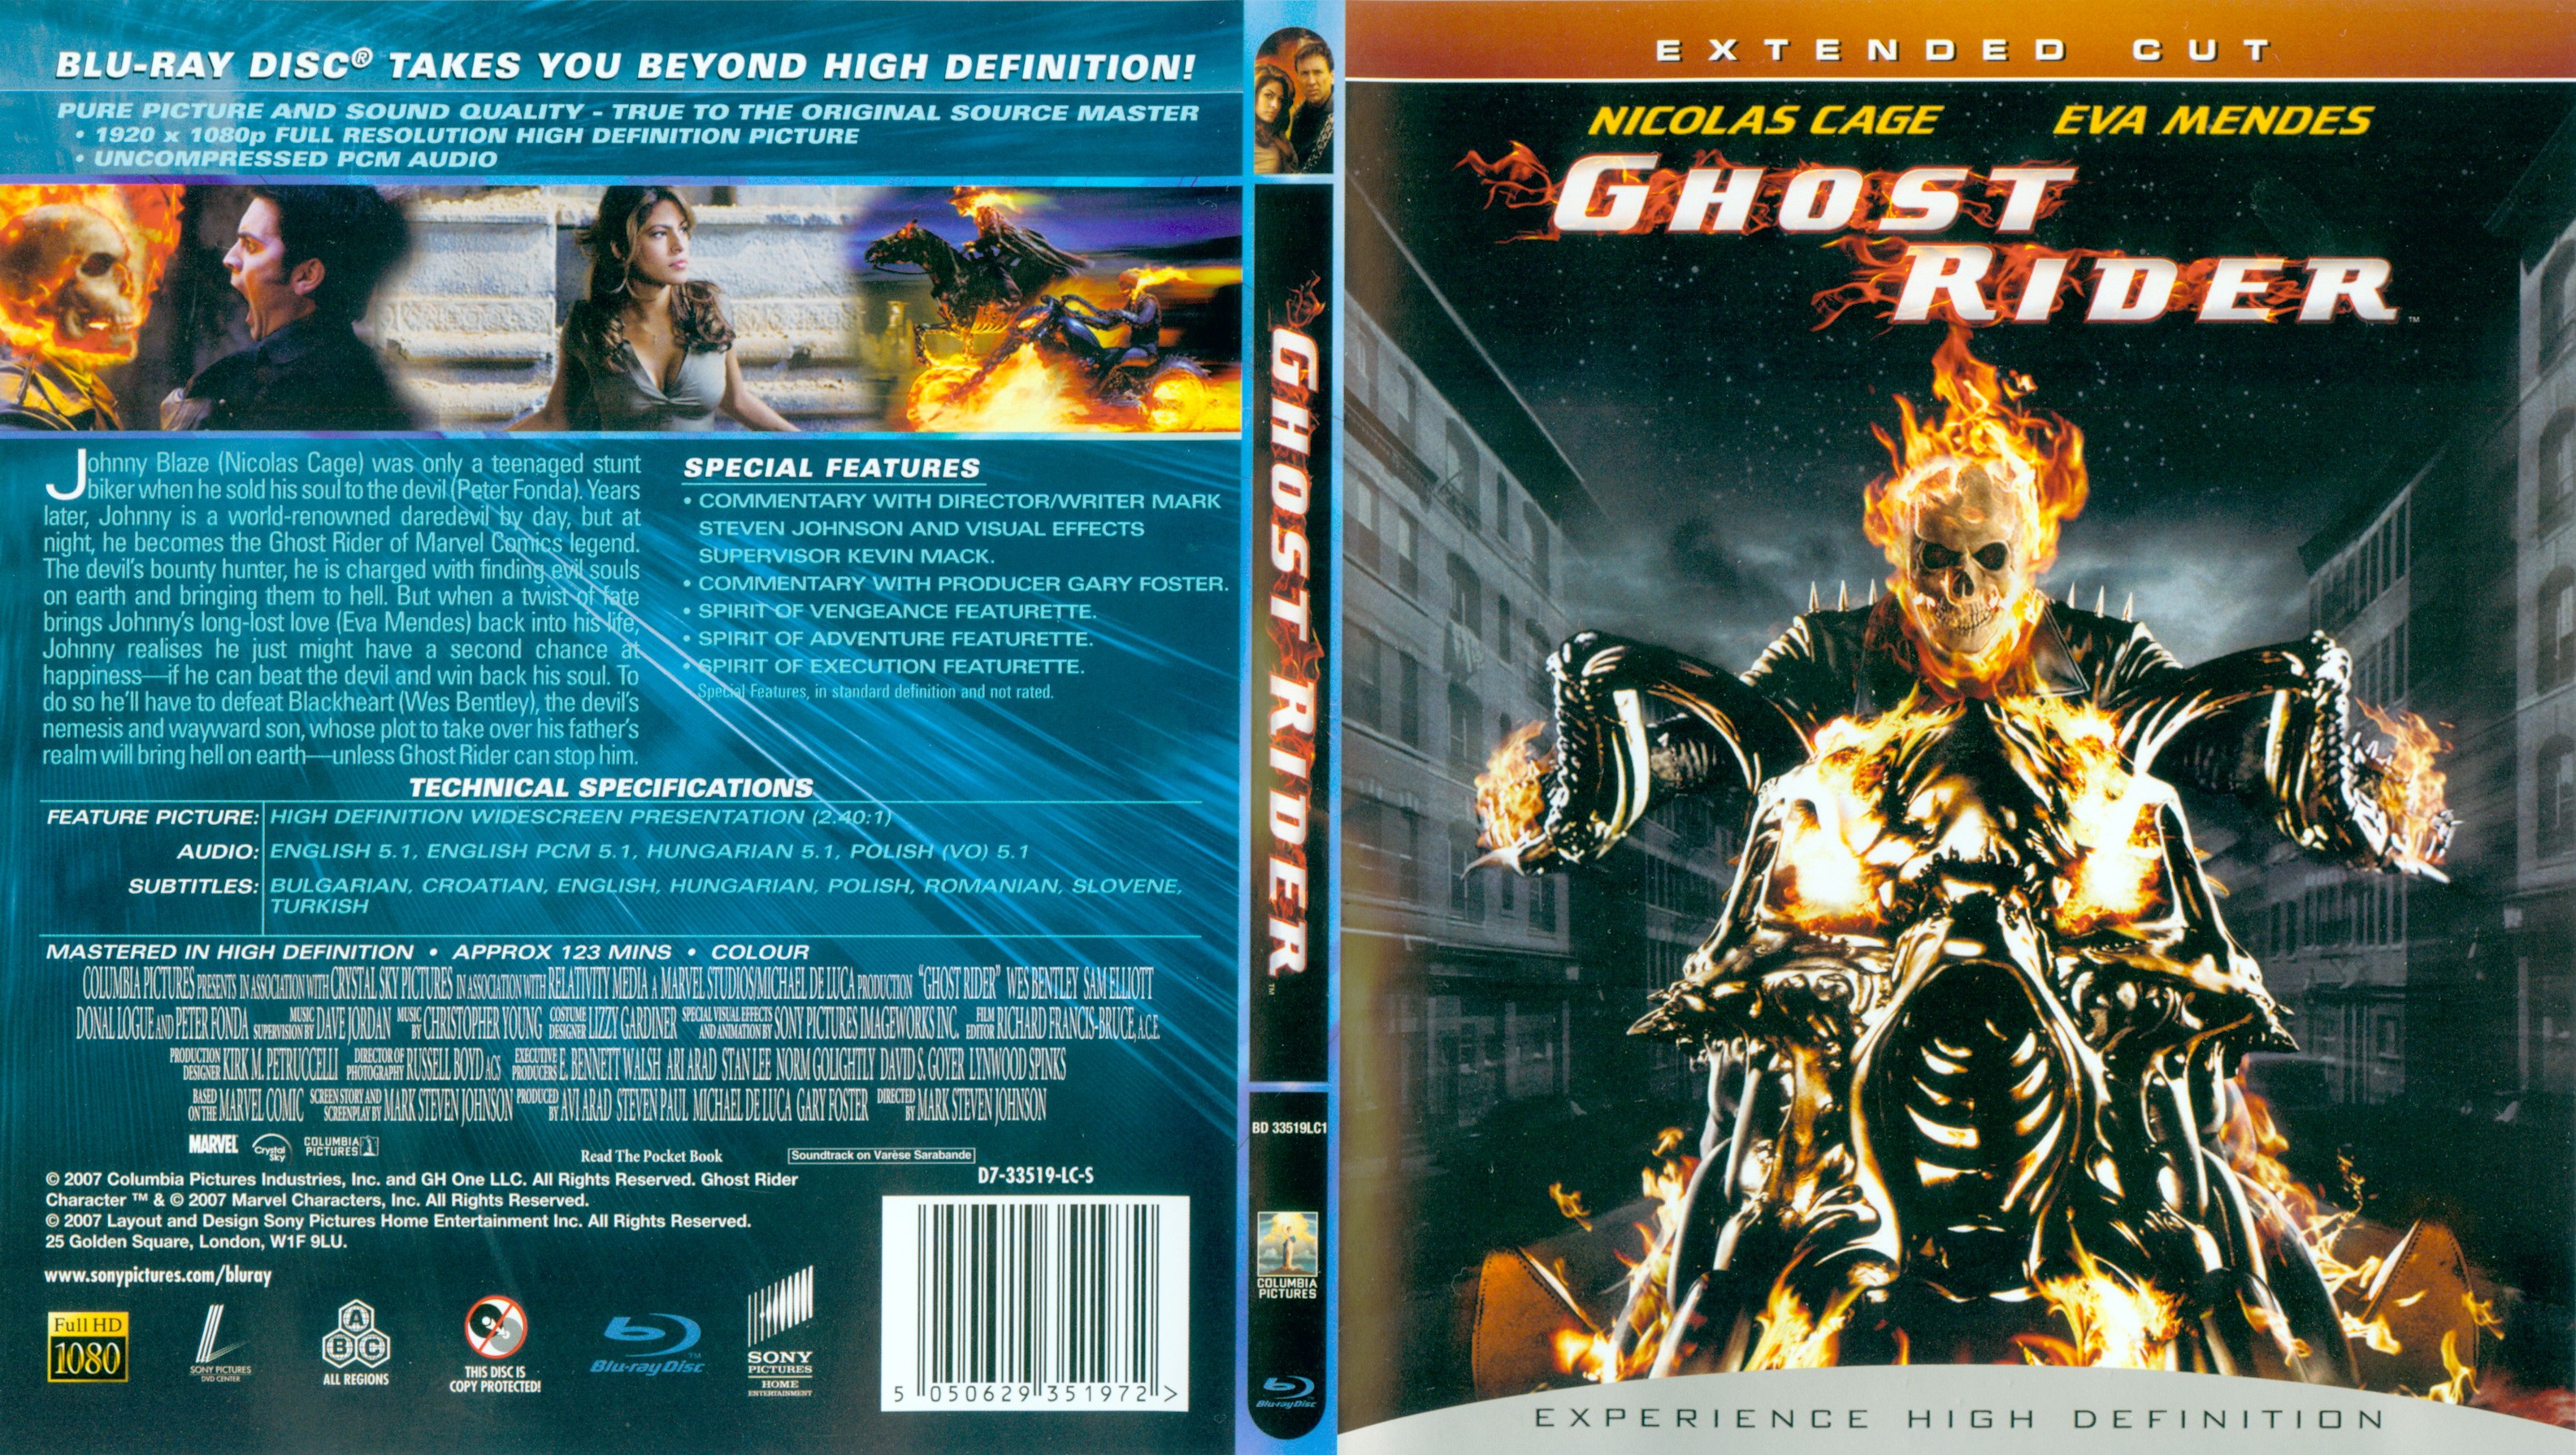 Jaquette DVD Ghost Rider (BLU-RAY)